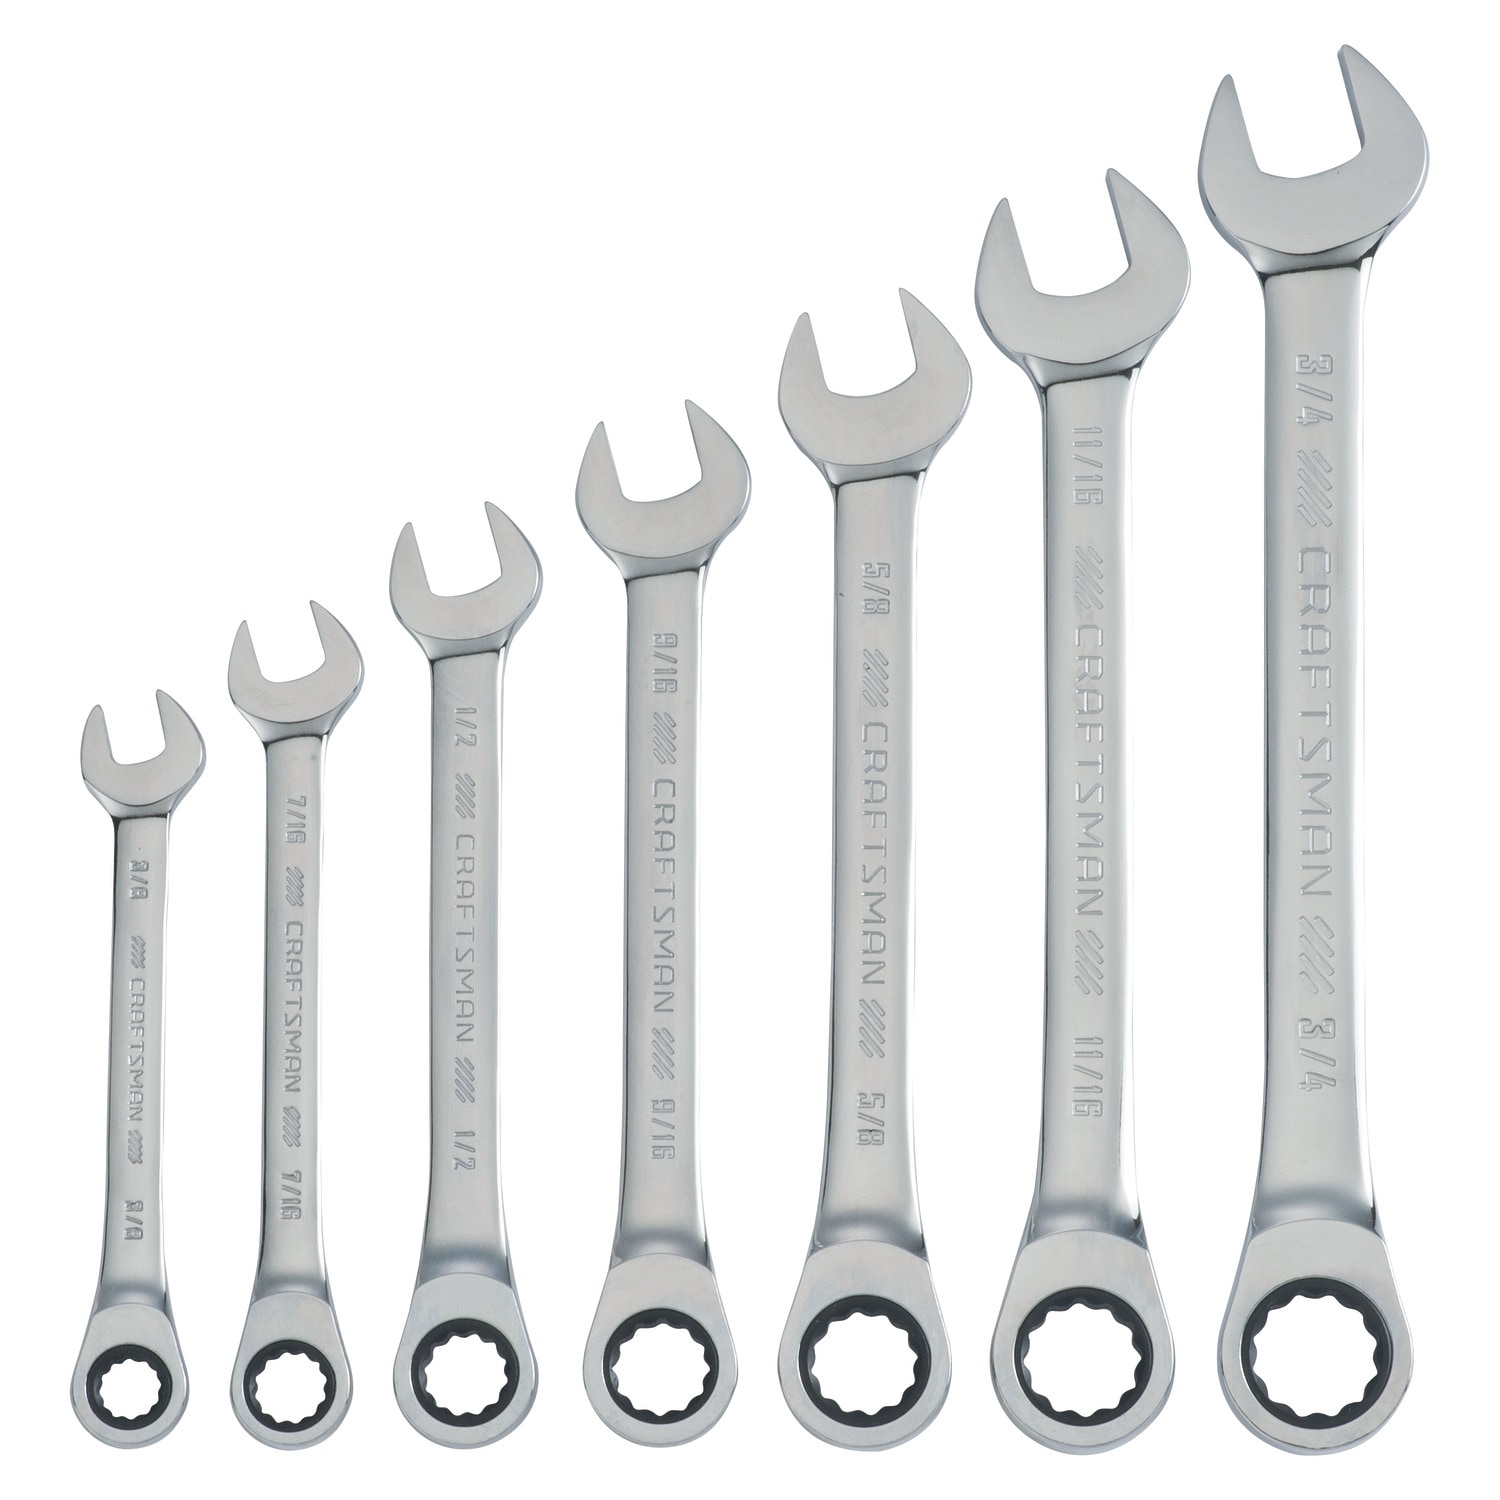 Craftsman 8pc METRIC Stubby Combination Wrenches MM Hand Tools Open Box Set 